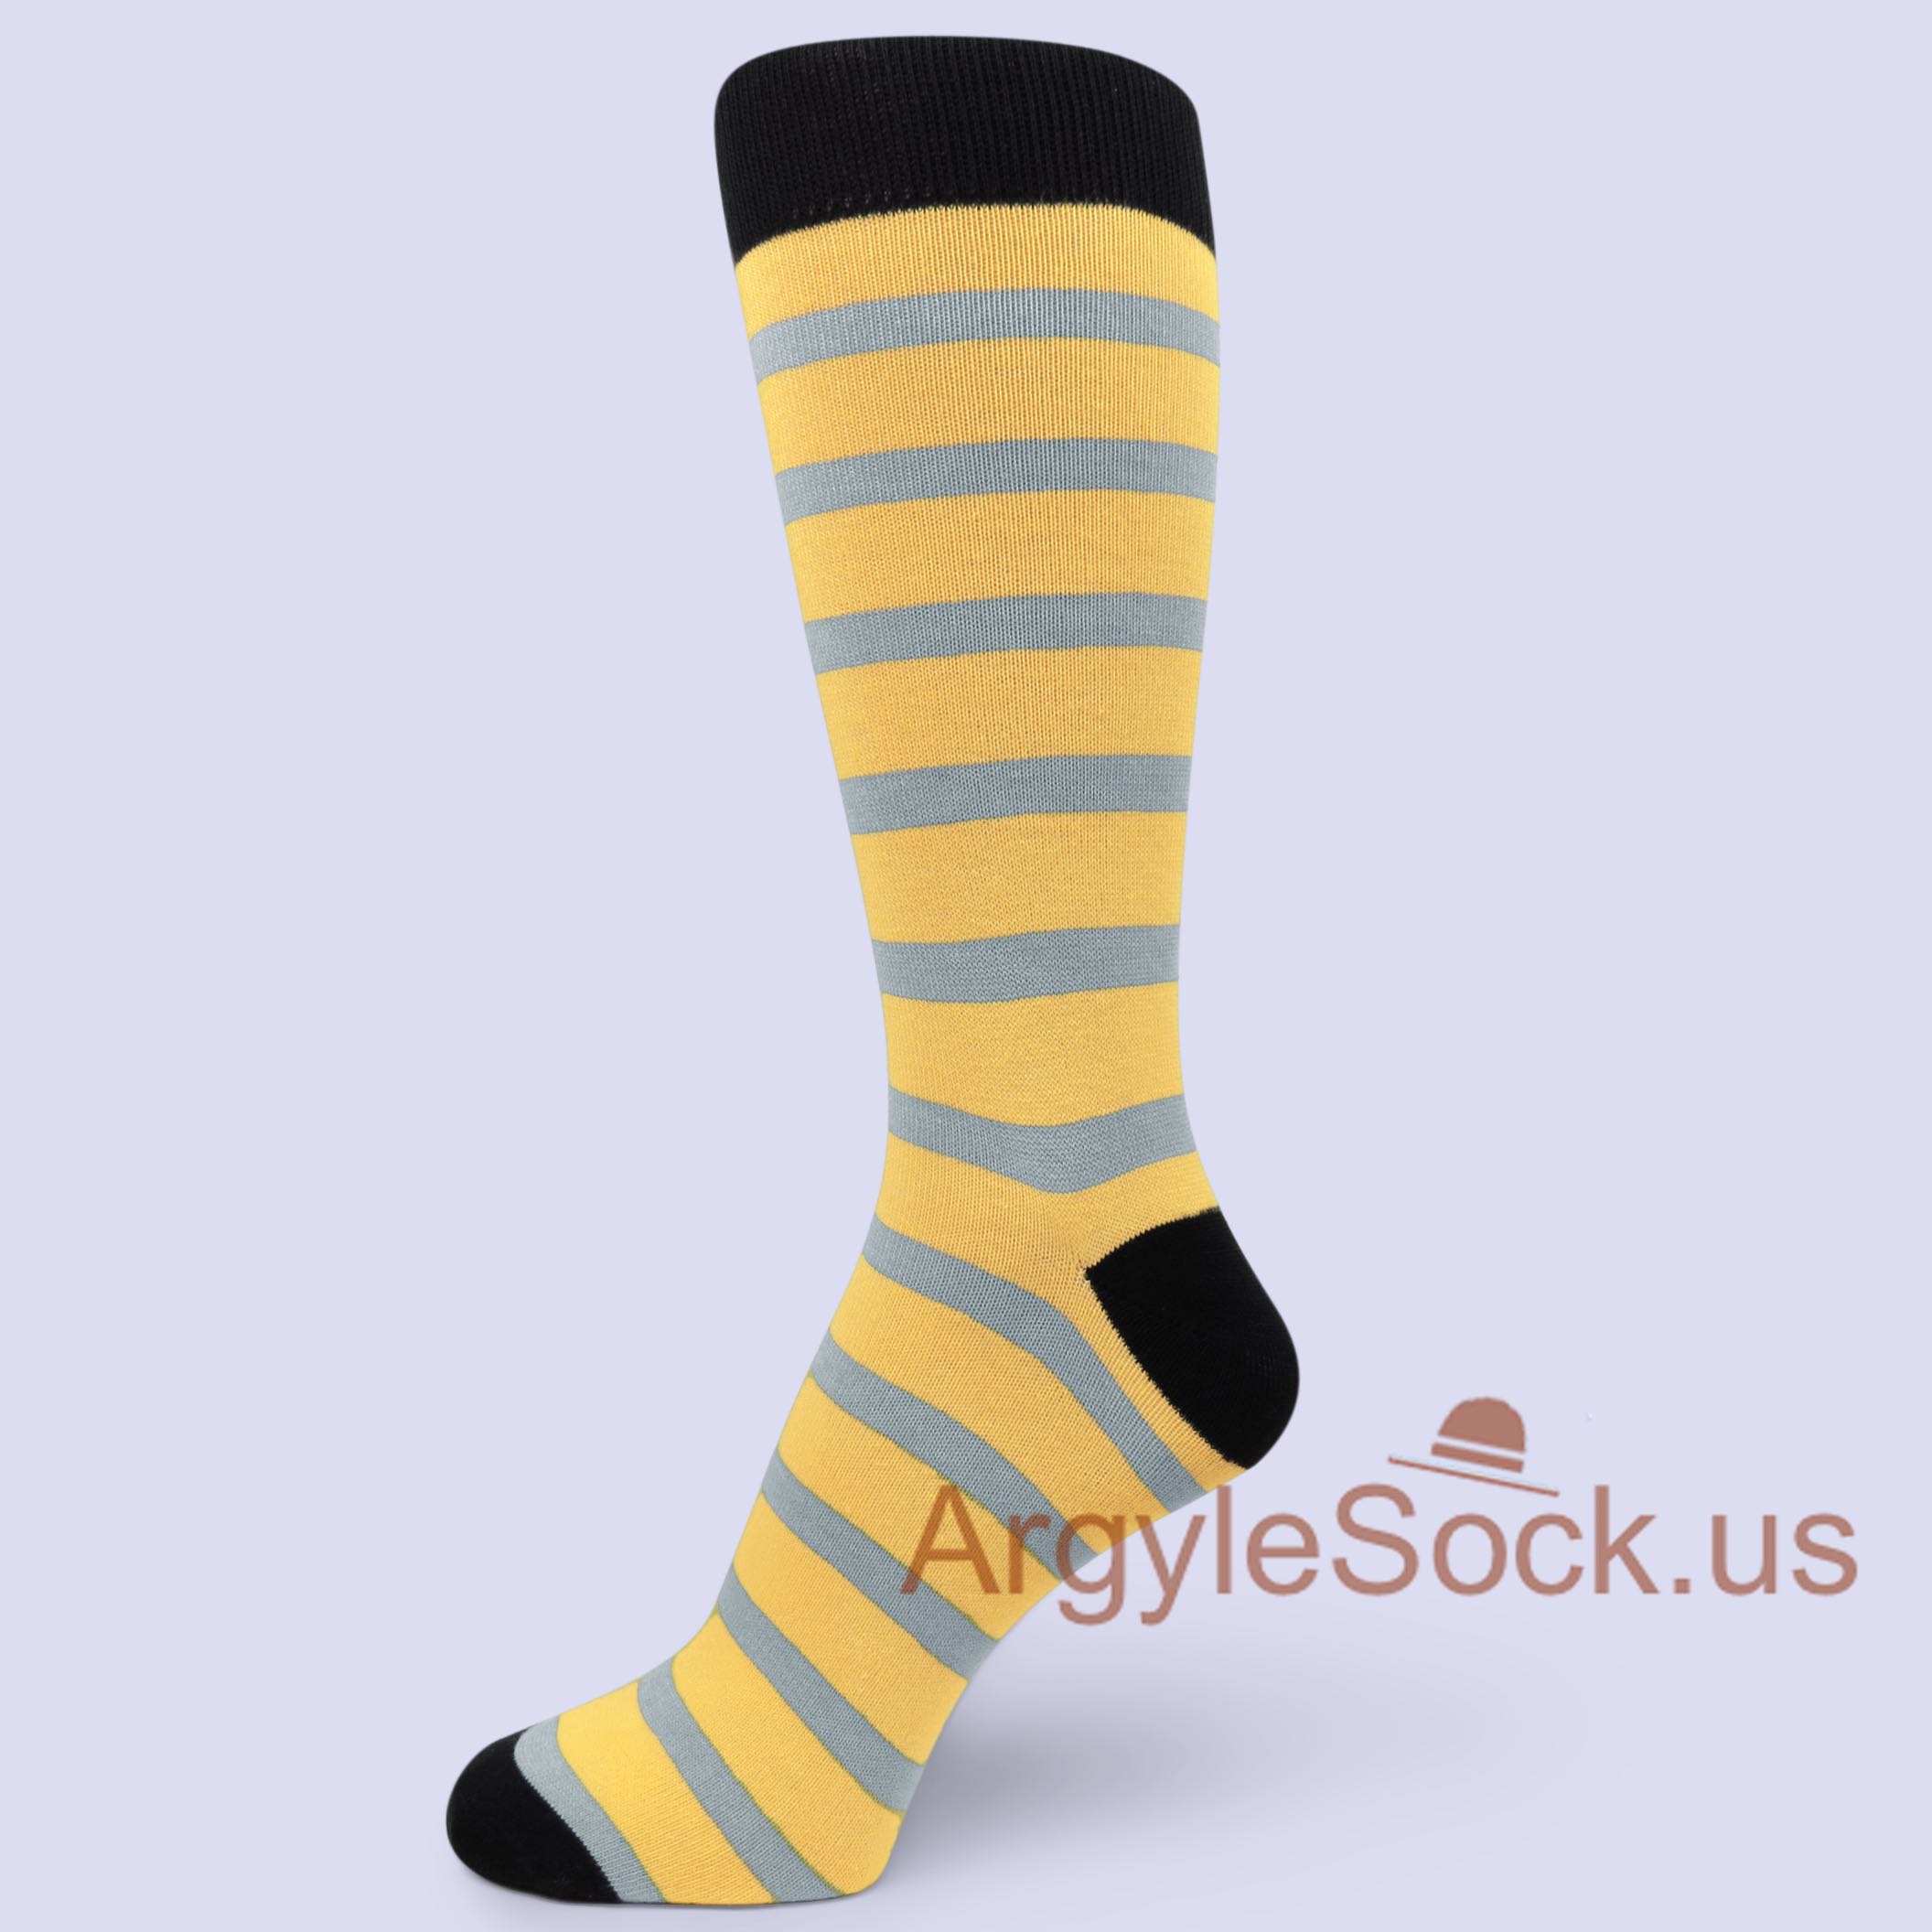 Grey Stripes on Yellow Mans Socks with Black Toe and Heel